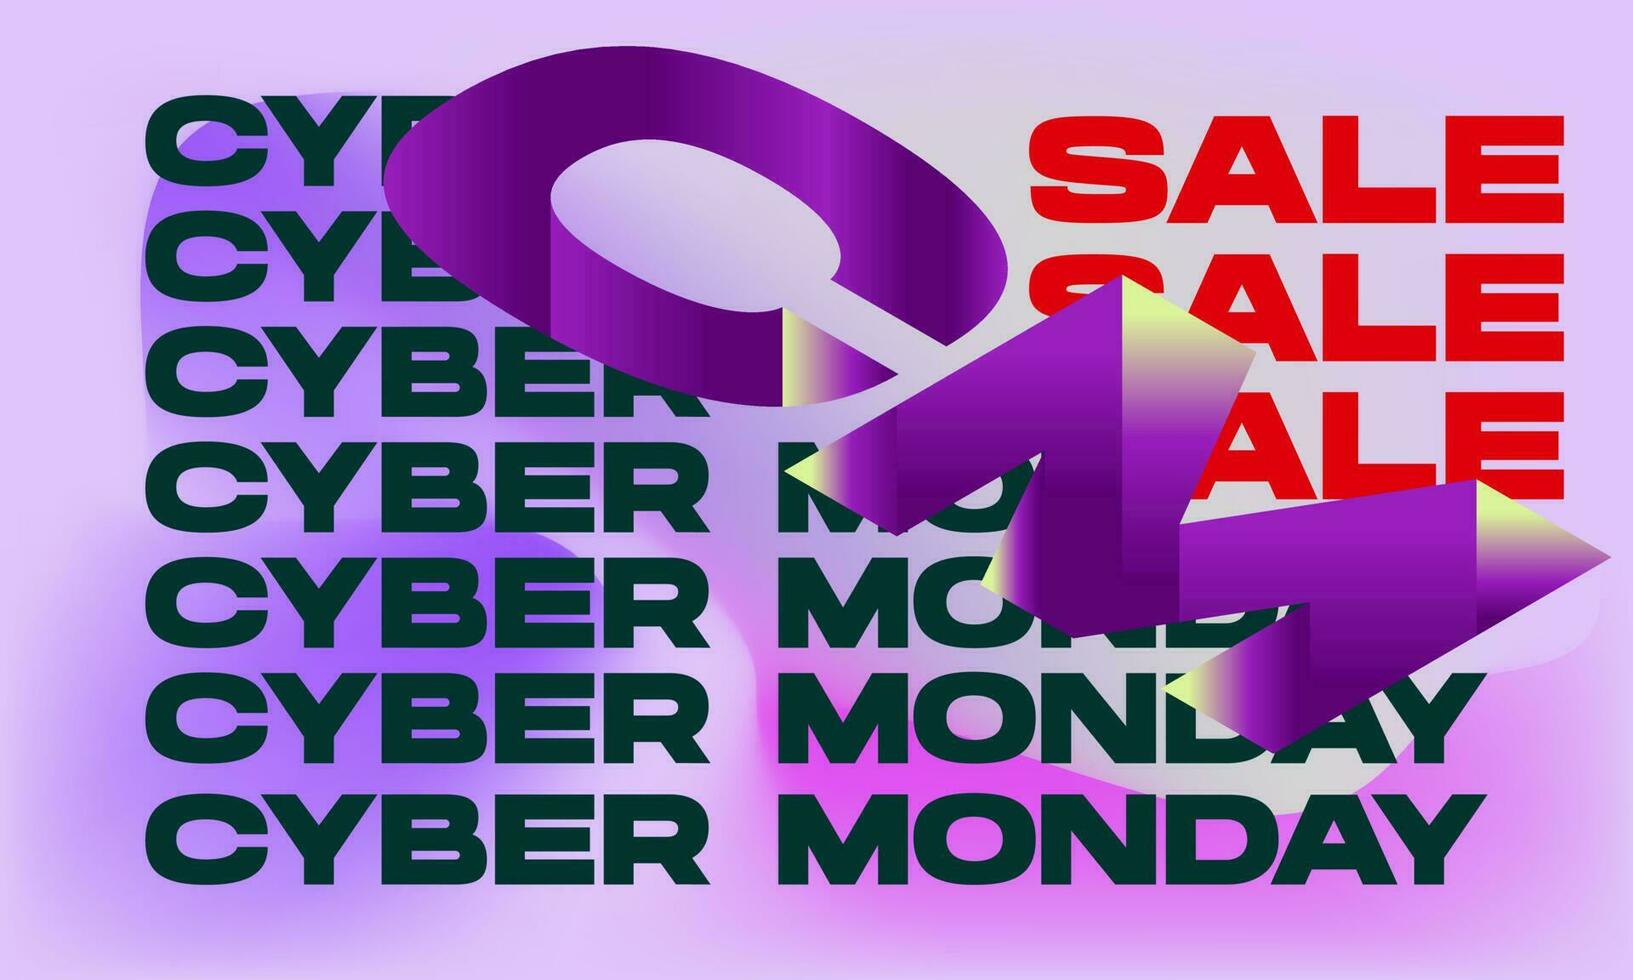 Cyber Monday with Deep Text Effect and Repeatable Text Gradient Mesh Purple Background. For Poster, Banner, Card Invitation, Social Media vector